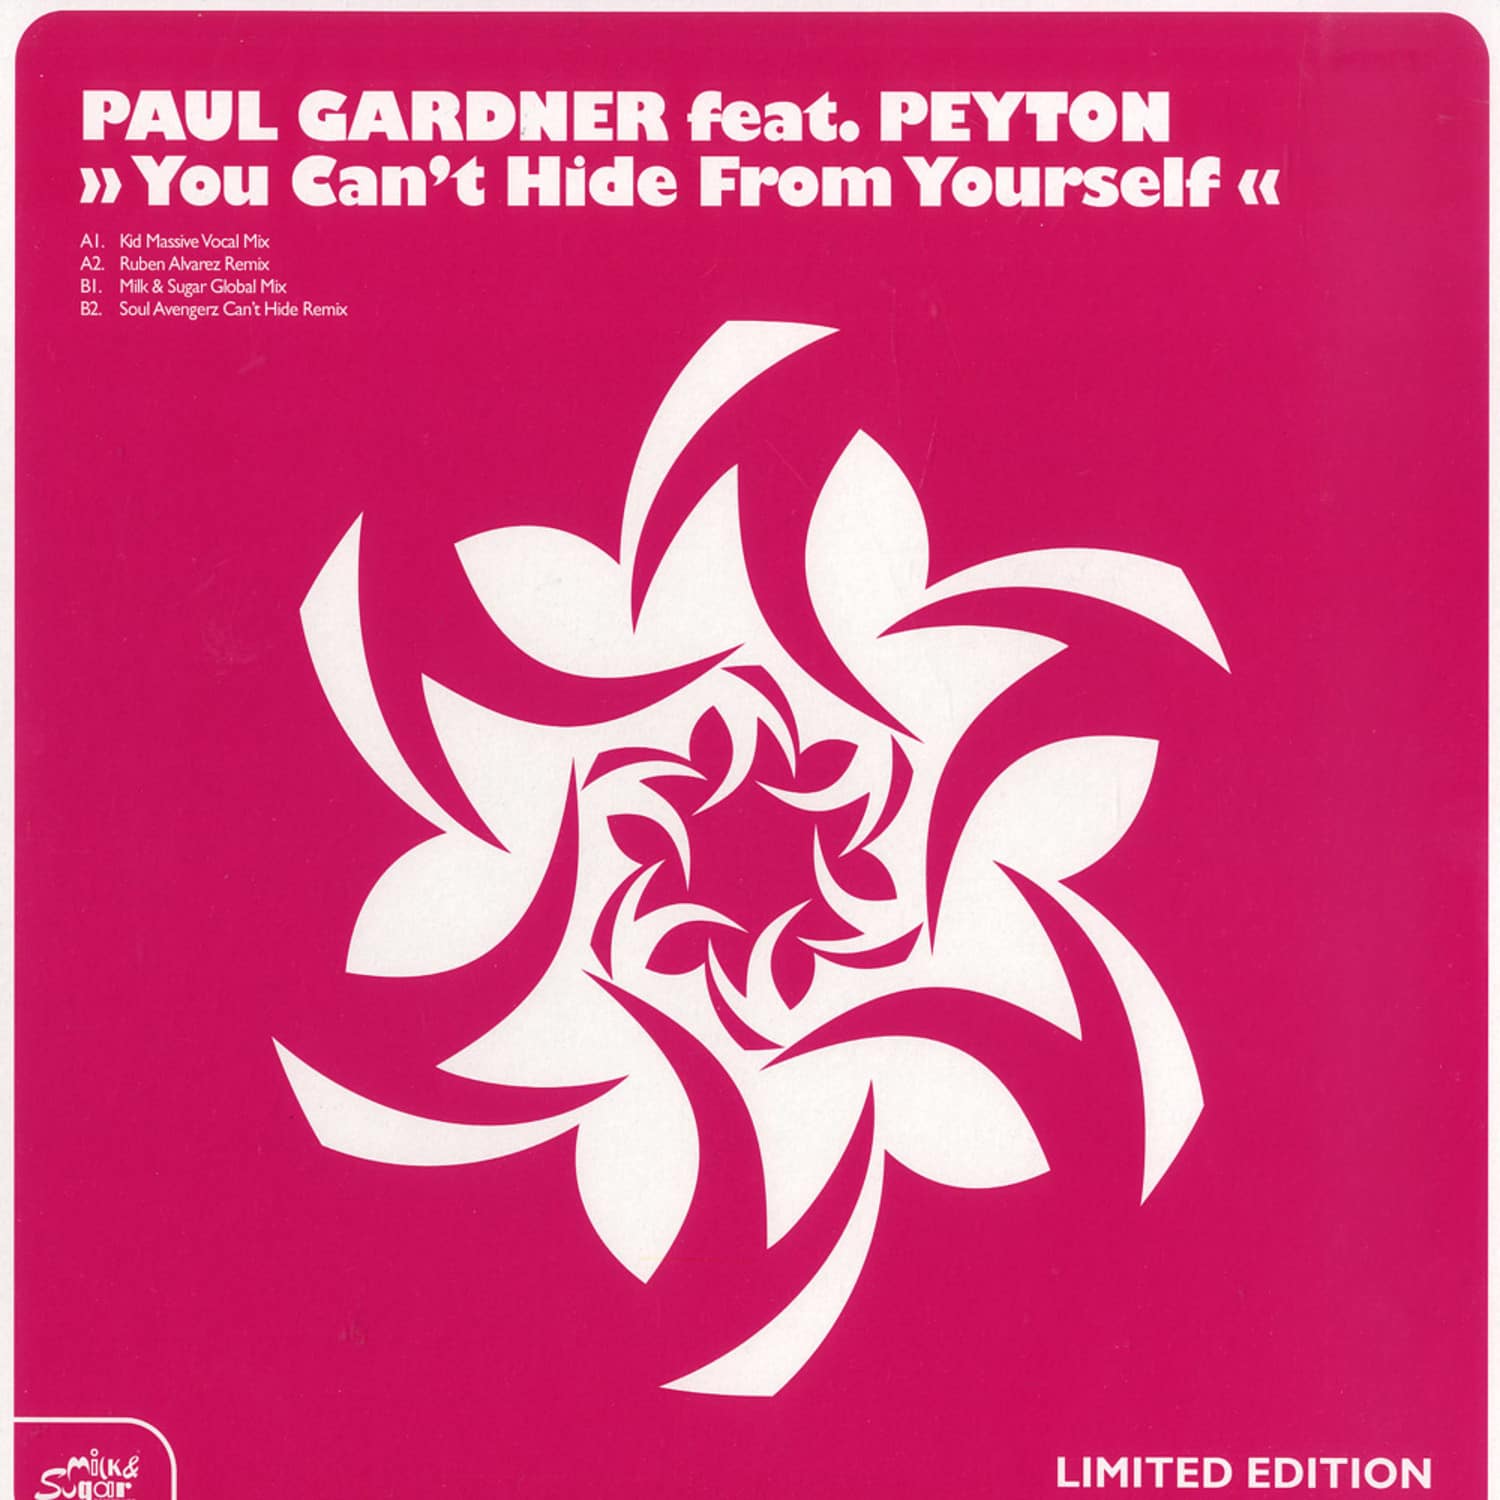 Paul Gardner feat Peyton - YOU CANT HIDE FROM YOURSELF